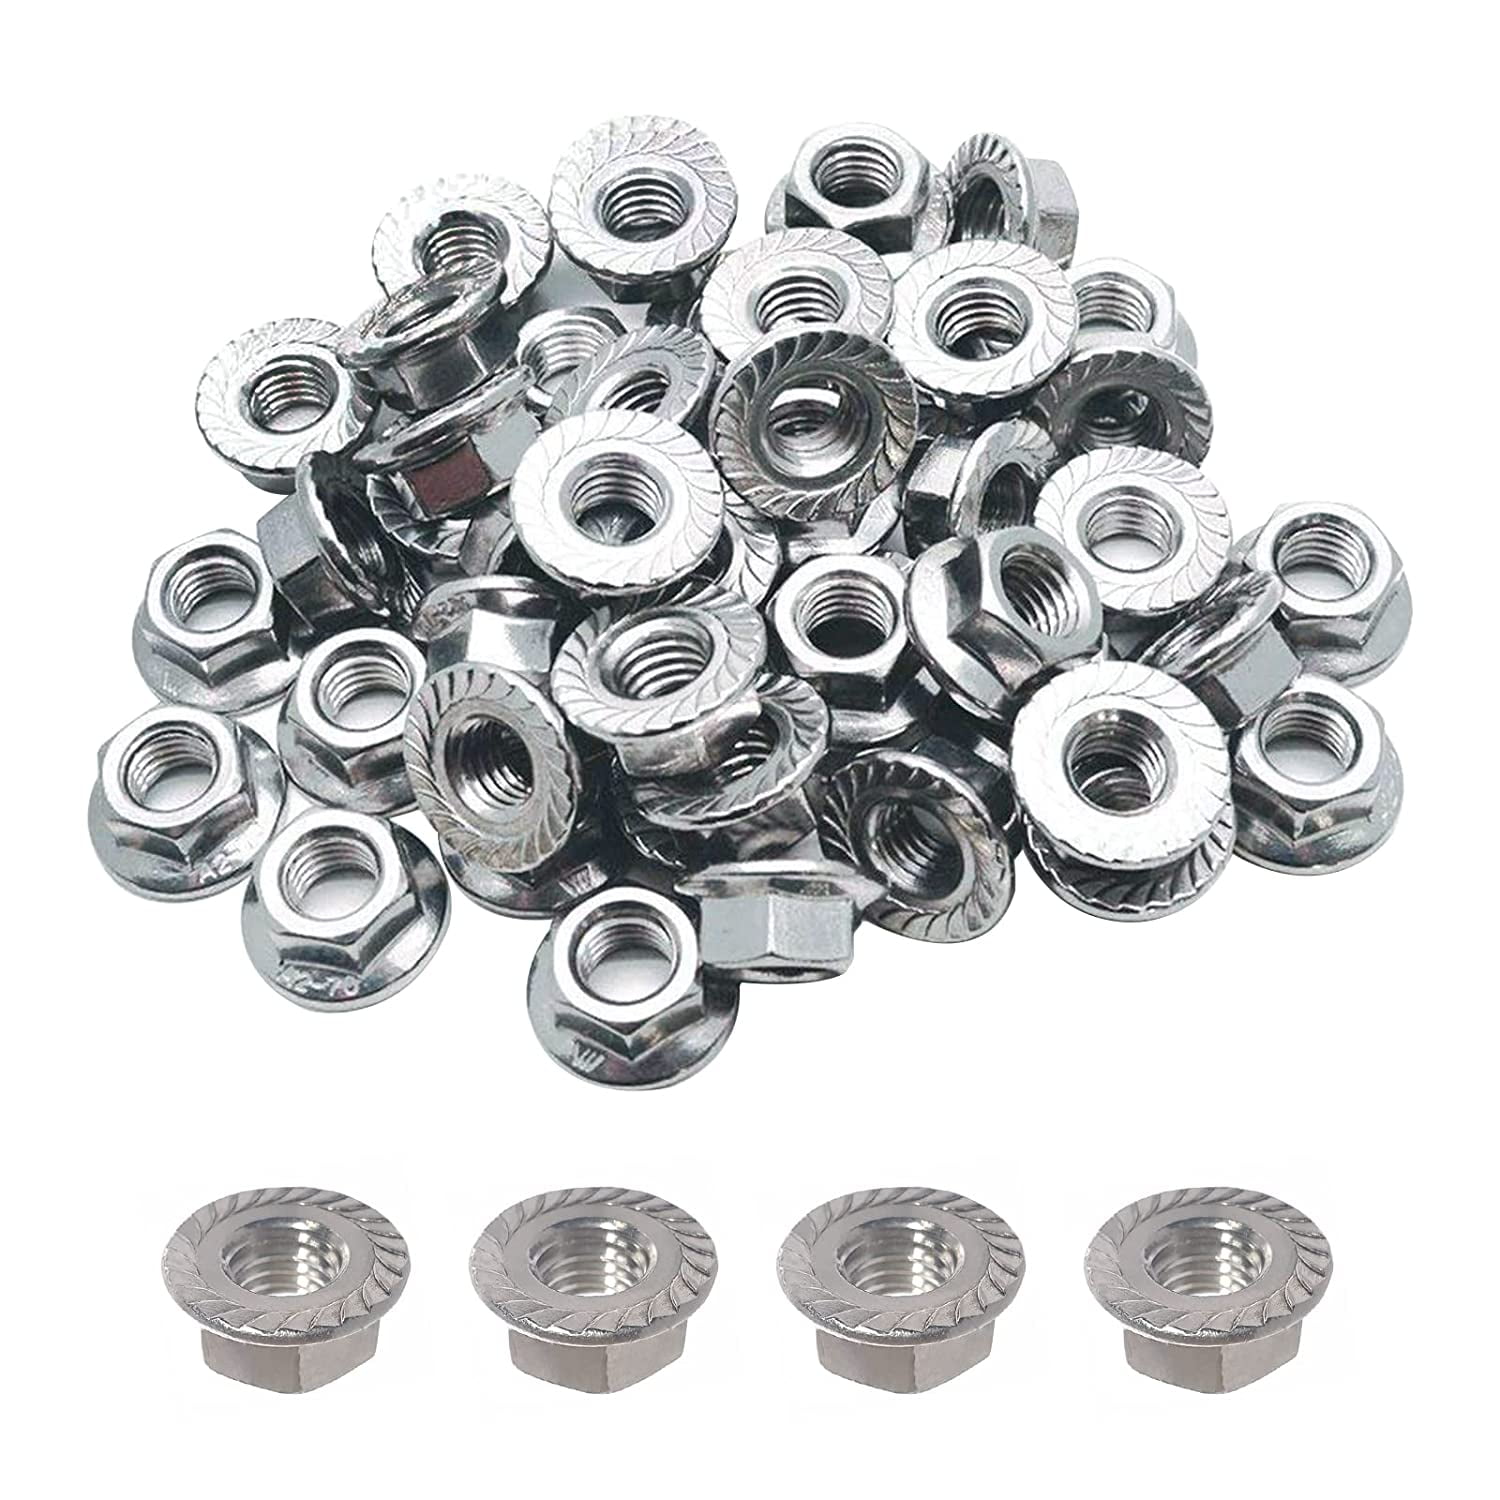 M10 Stainless Steel Serrated Flange Nuts x 10 